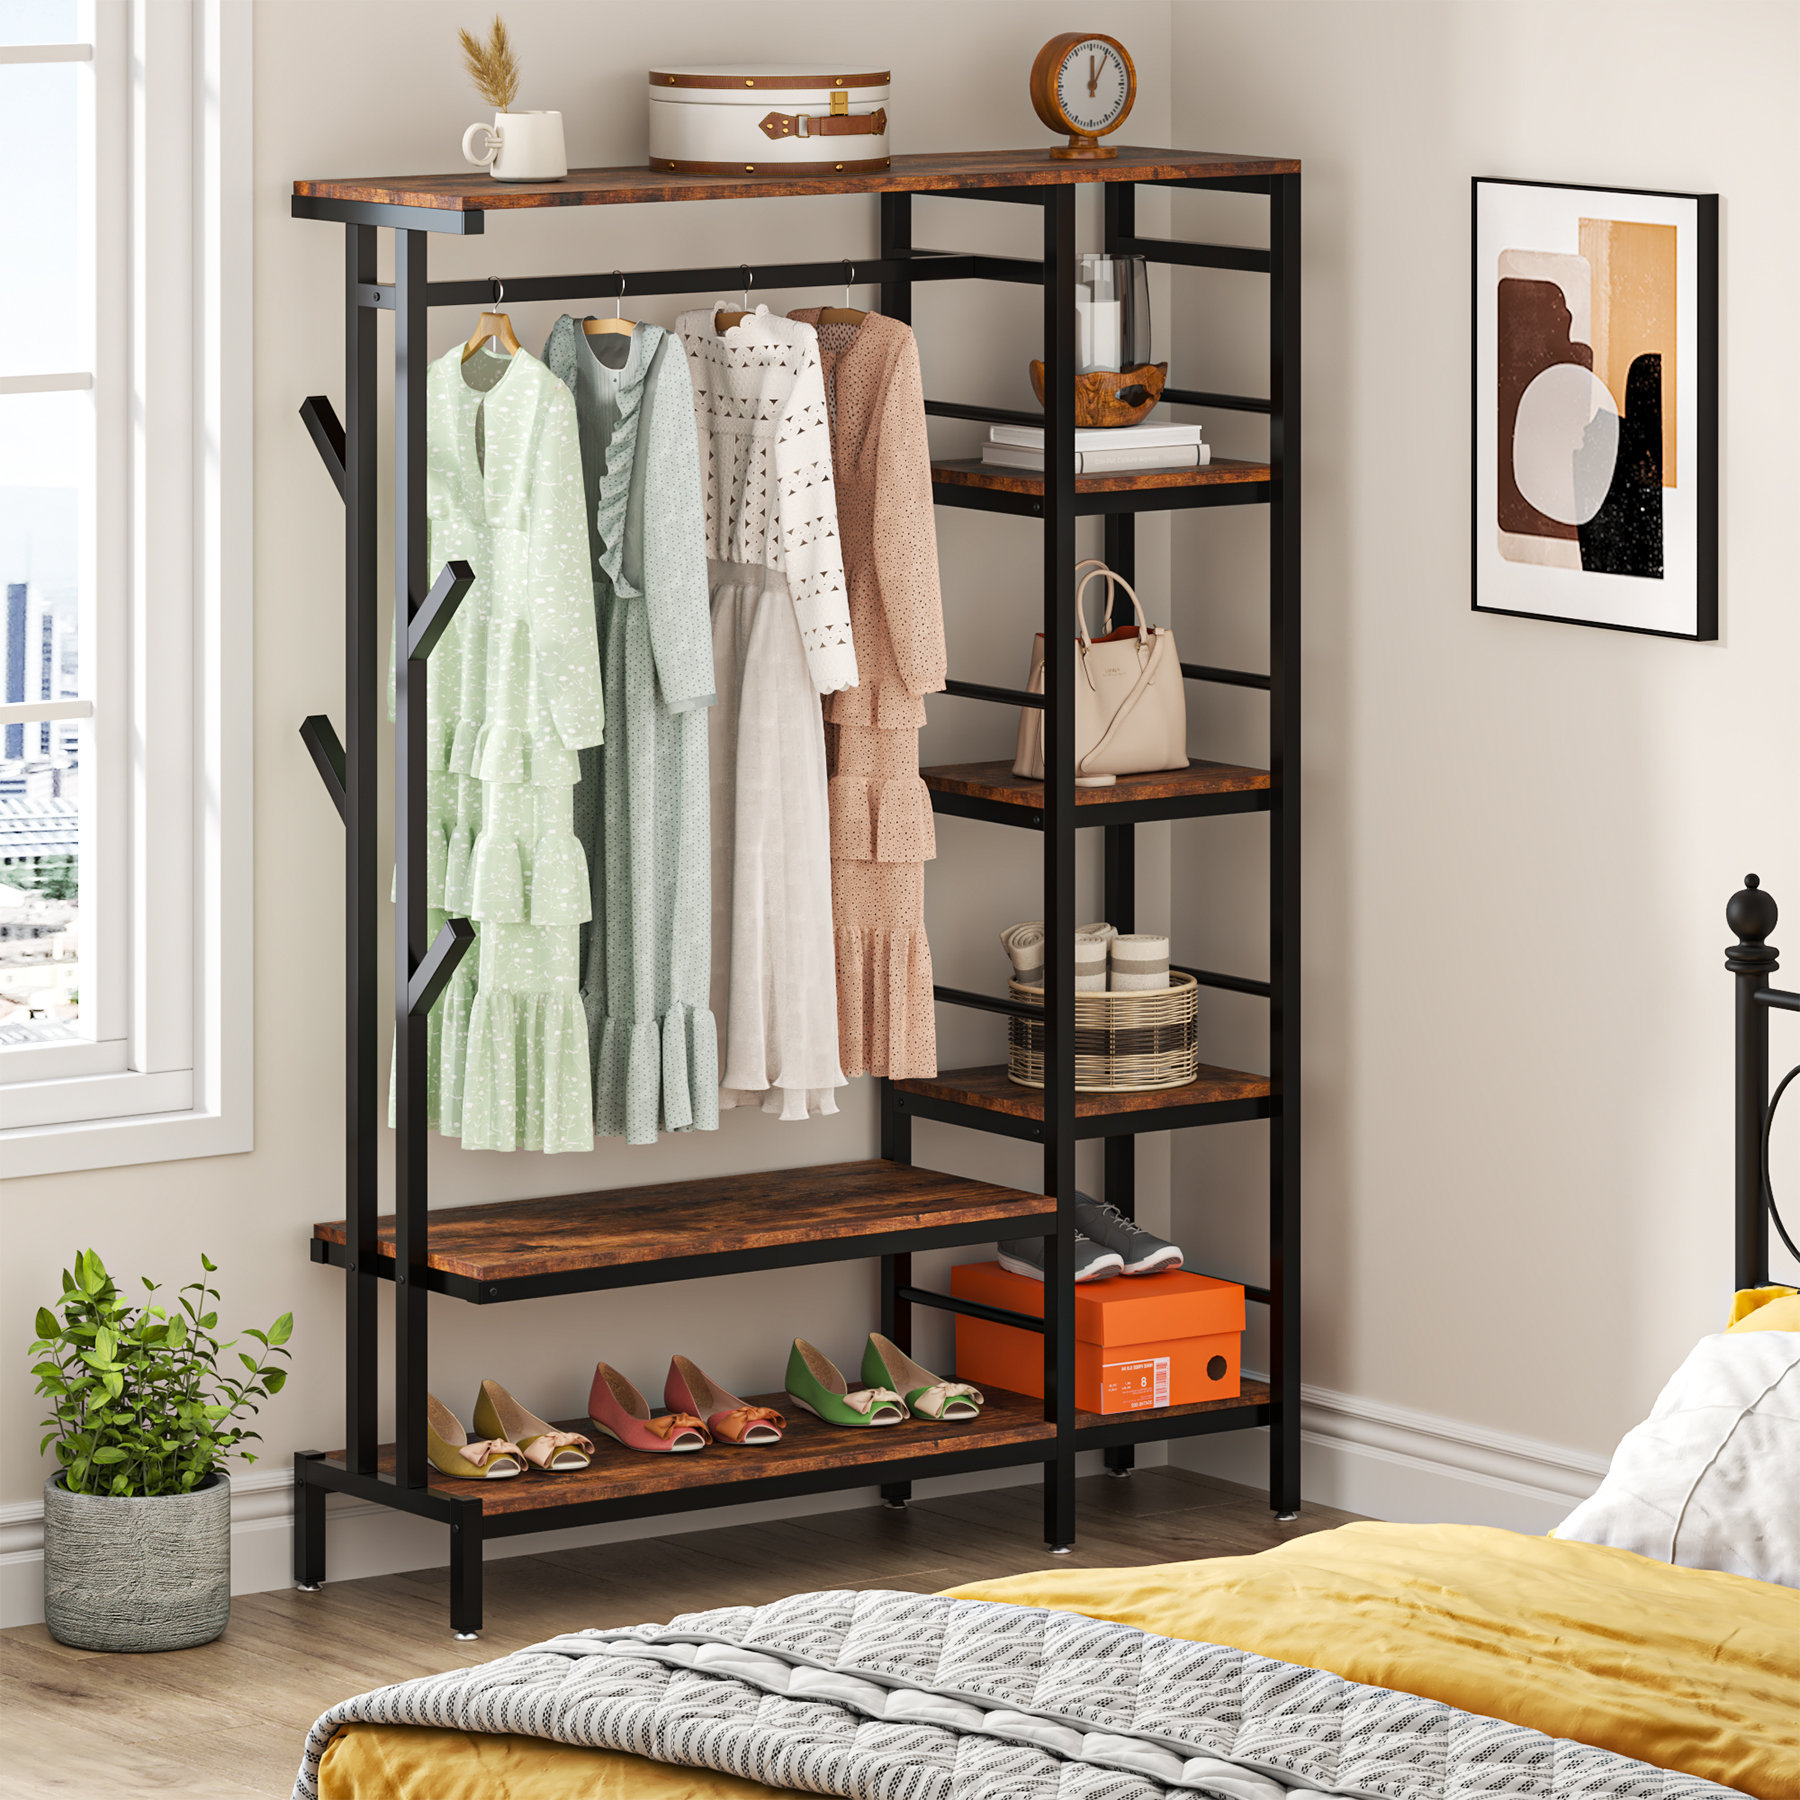 17 Heavy-Duty Clothing Hangers - For Super Heavy Clothes